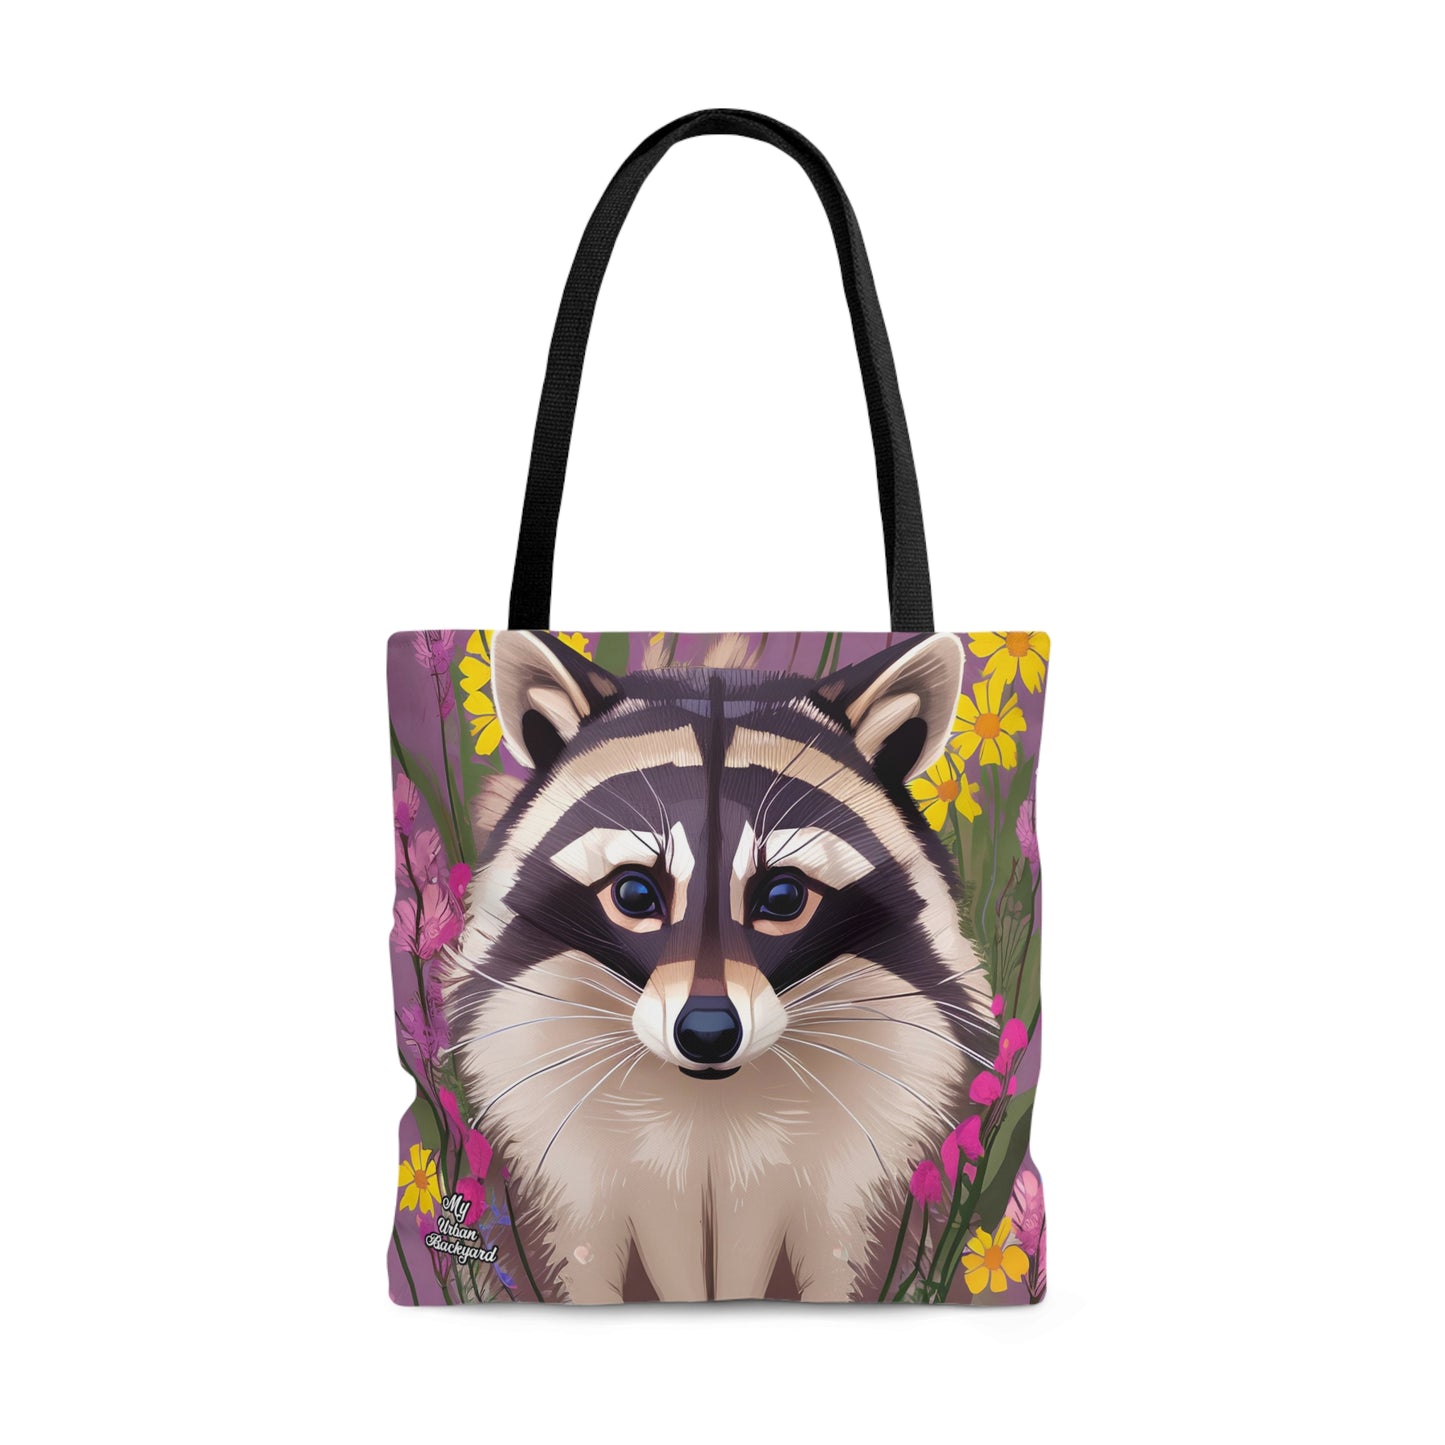 Raccoon and Flowers, Tote Bag for Everyday Use - Durable and Functional